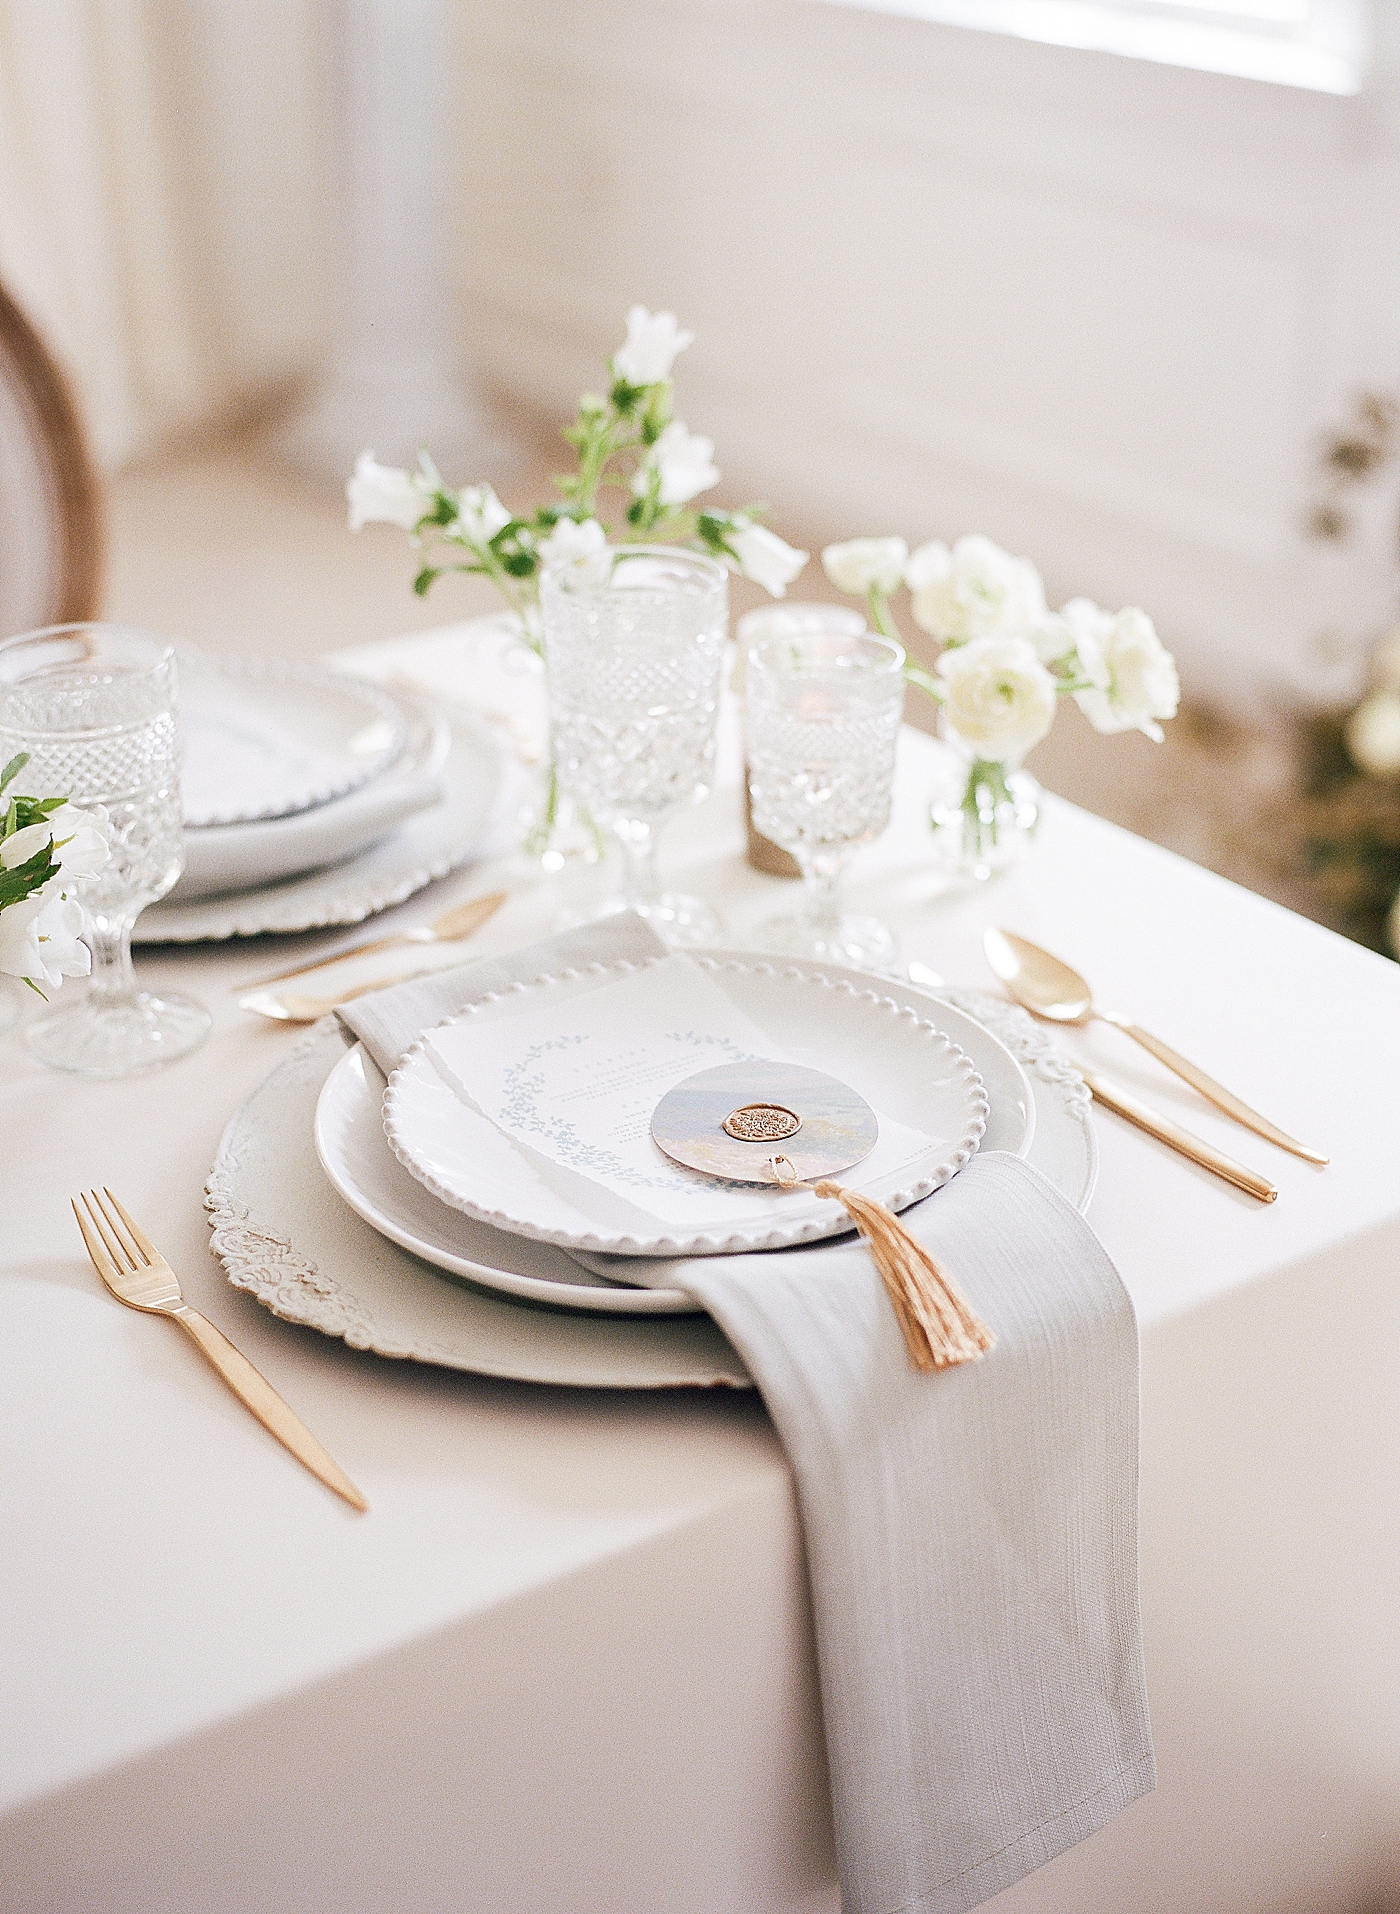 Detail of place setting during Old World Romance Editorial | Photo by Hope Helmuth Photograpghy